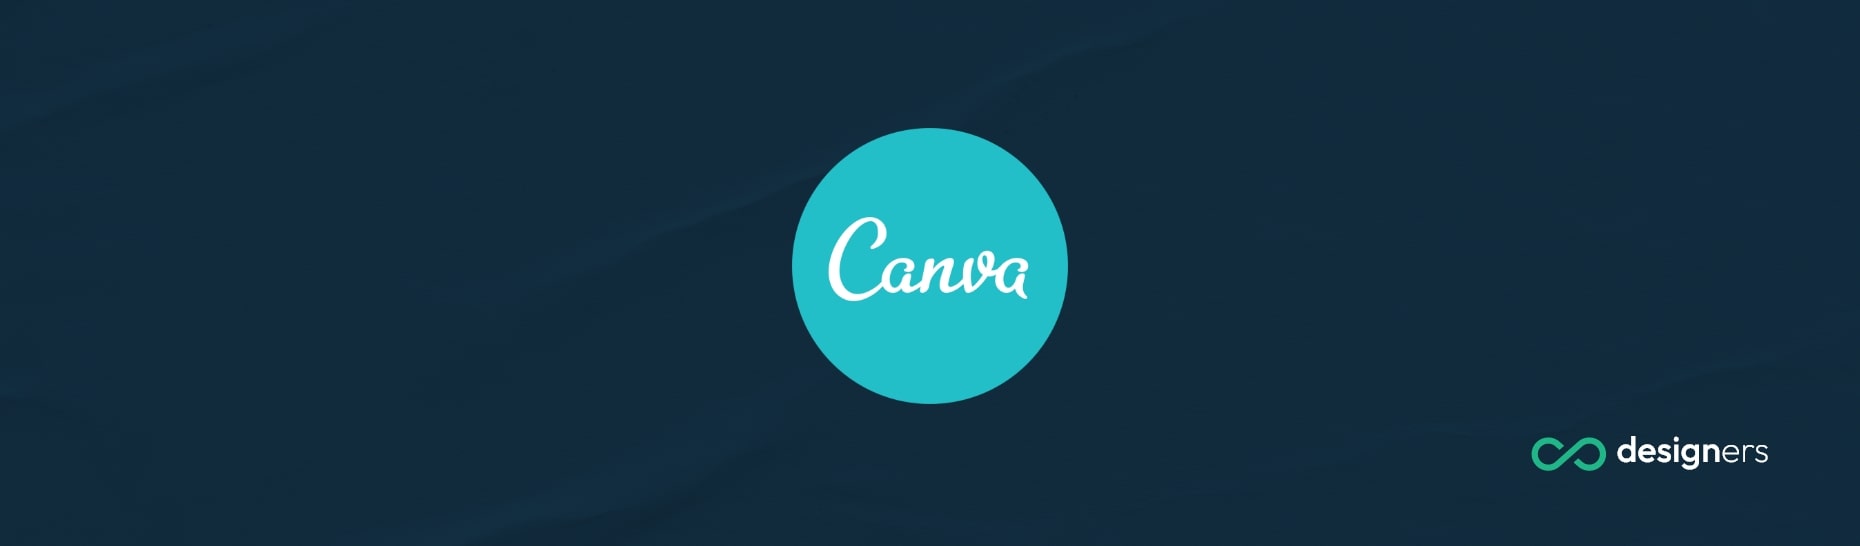 Does Canva Do Email Marketing?